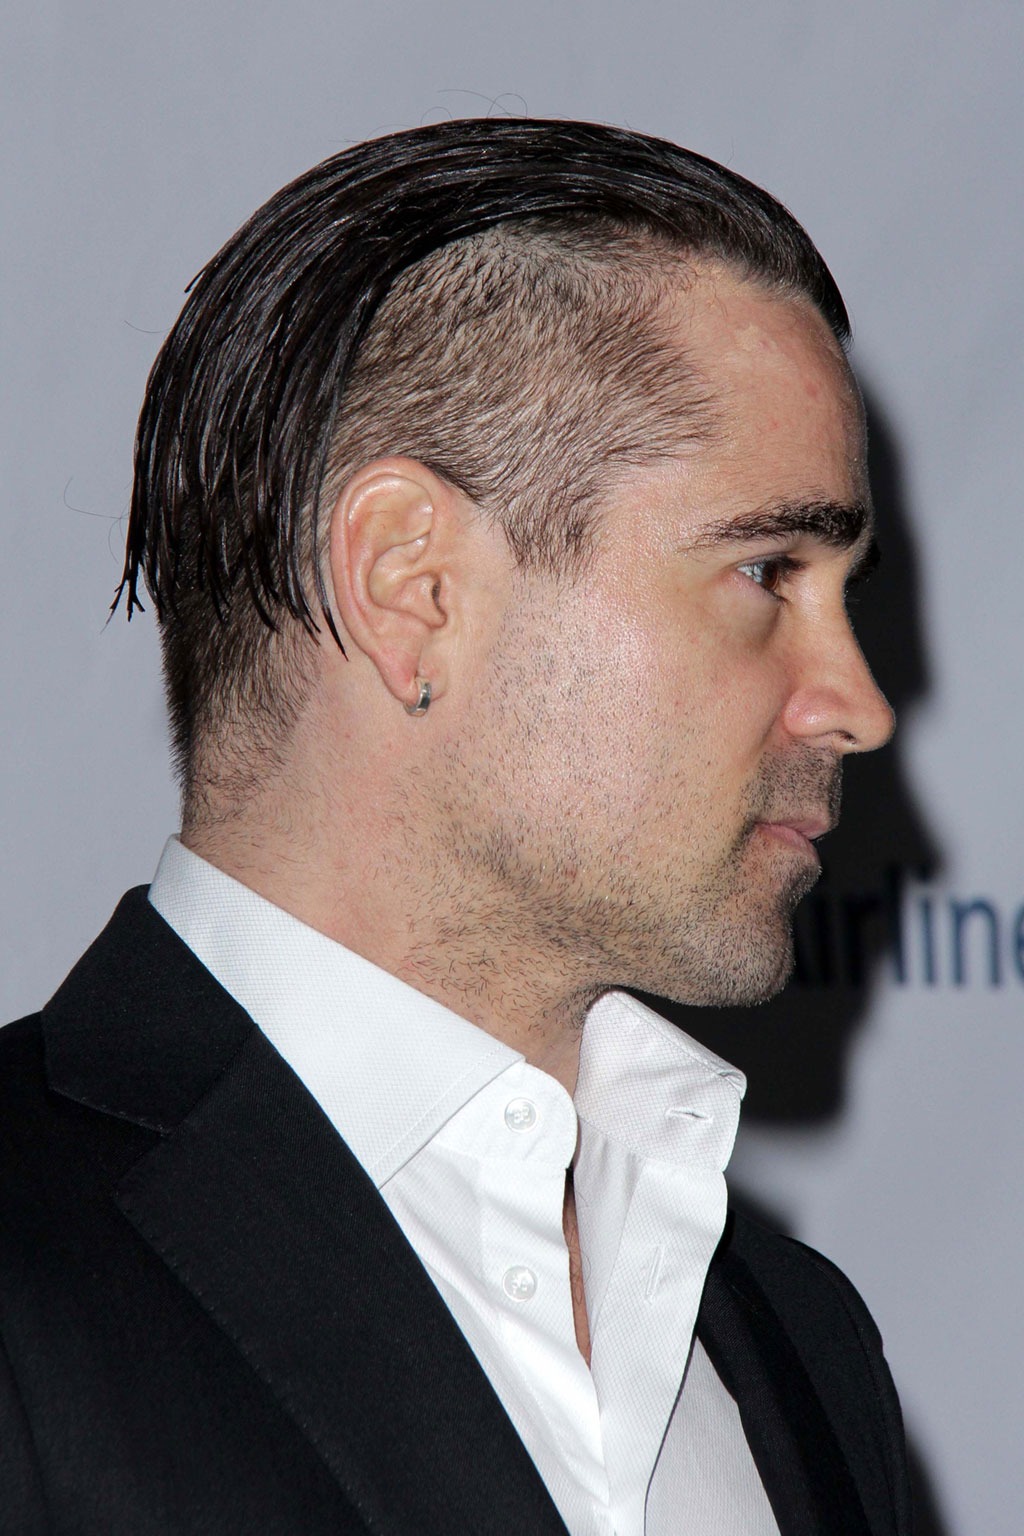 greasy-hairstyle-men-Colin-Farrell-Haircut-675x1013 5 Mind-blowing 80'...